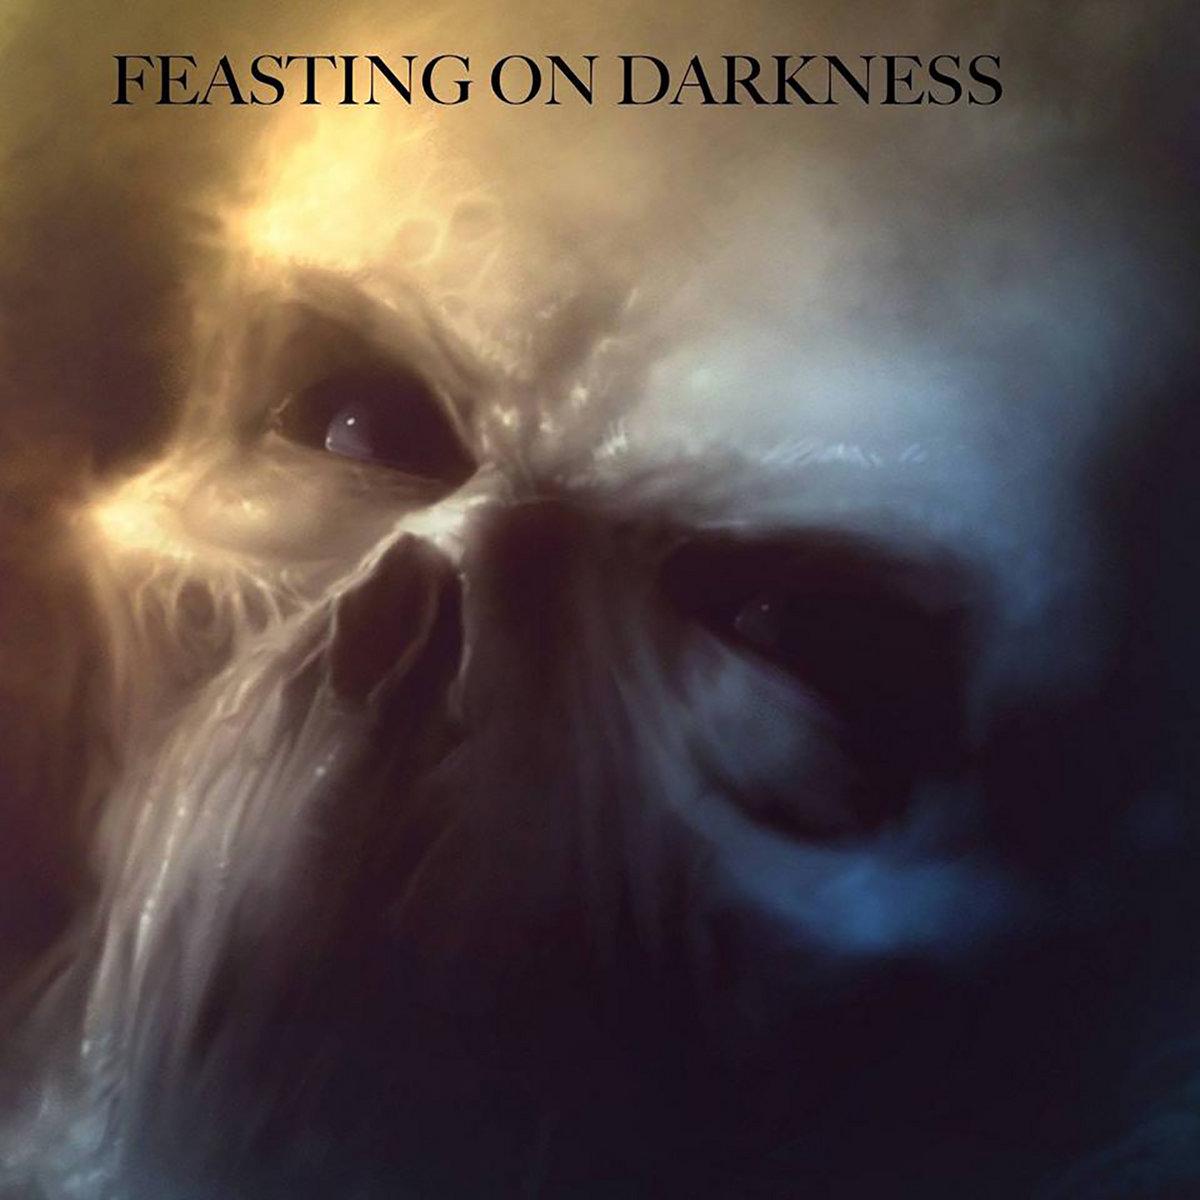 Feasting on Darkness